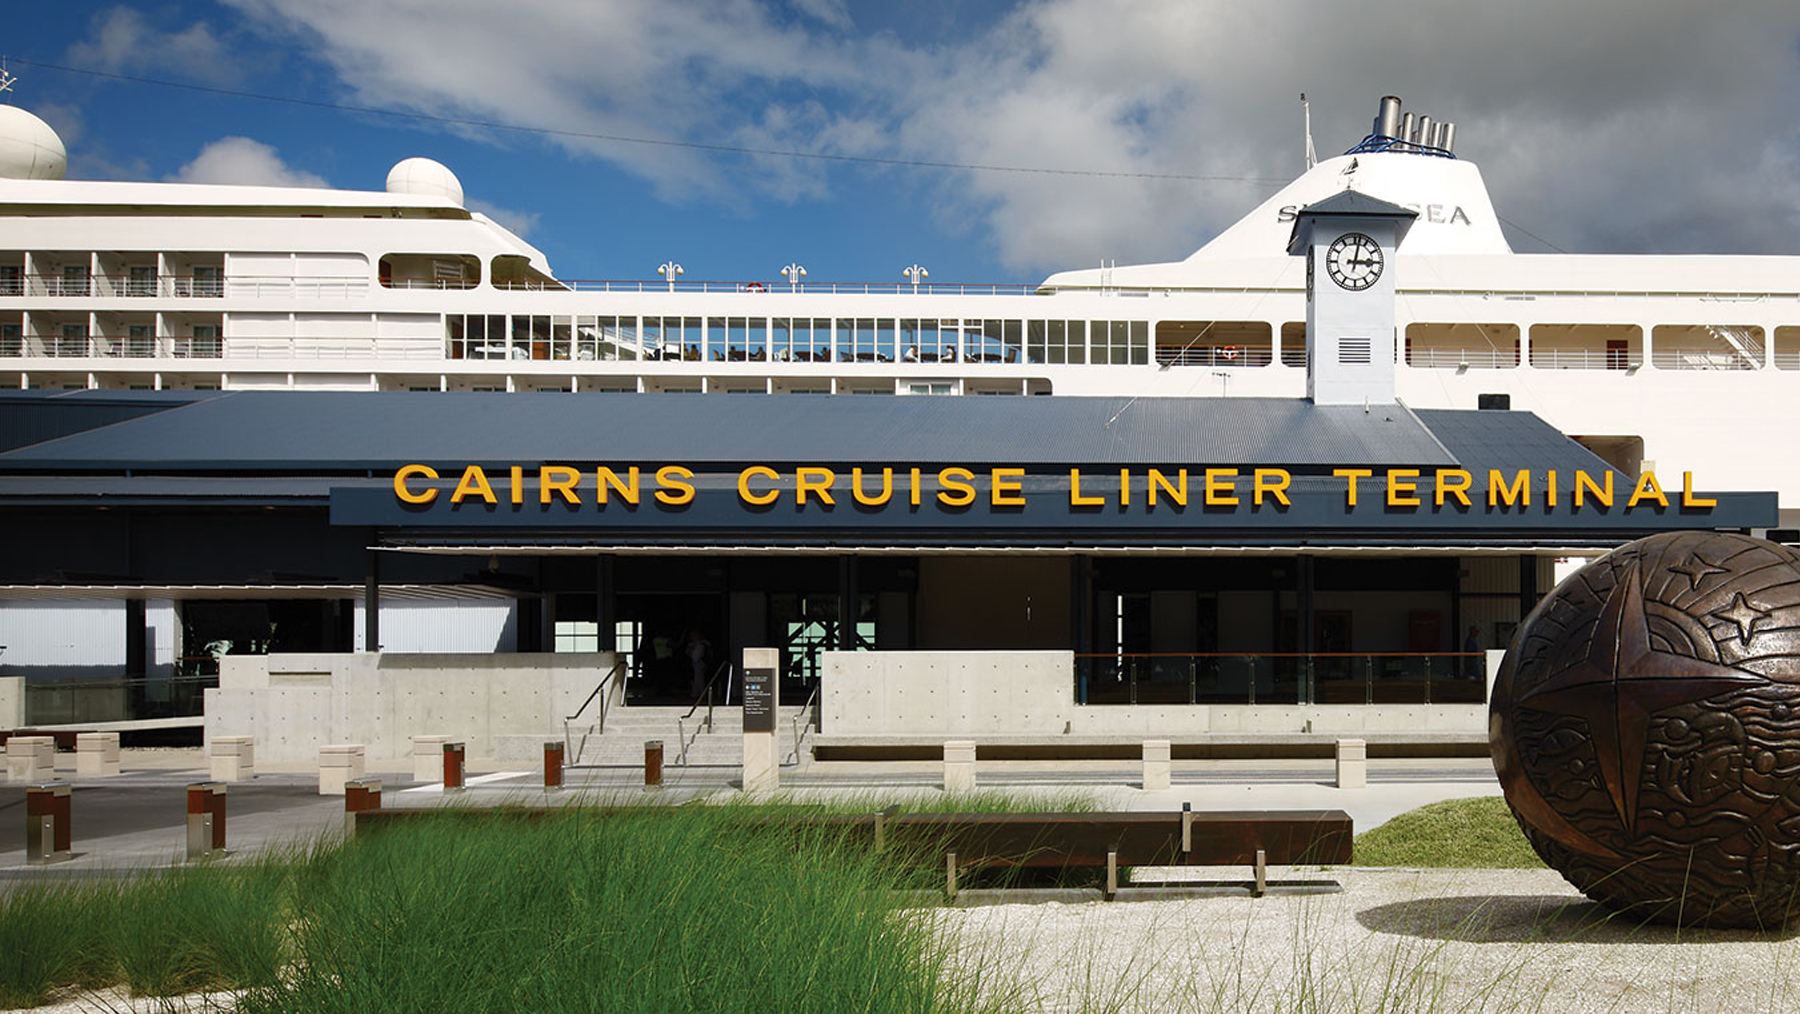  Cairns Cruise Liner Terminal
